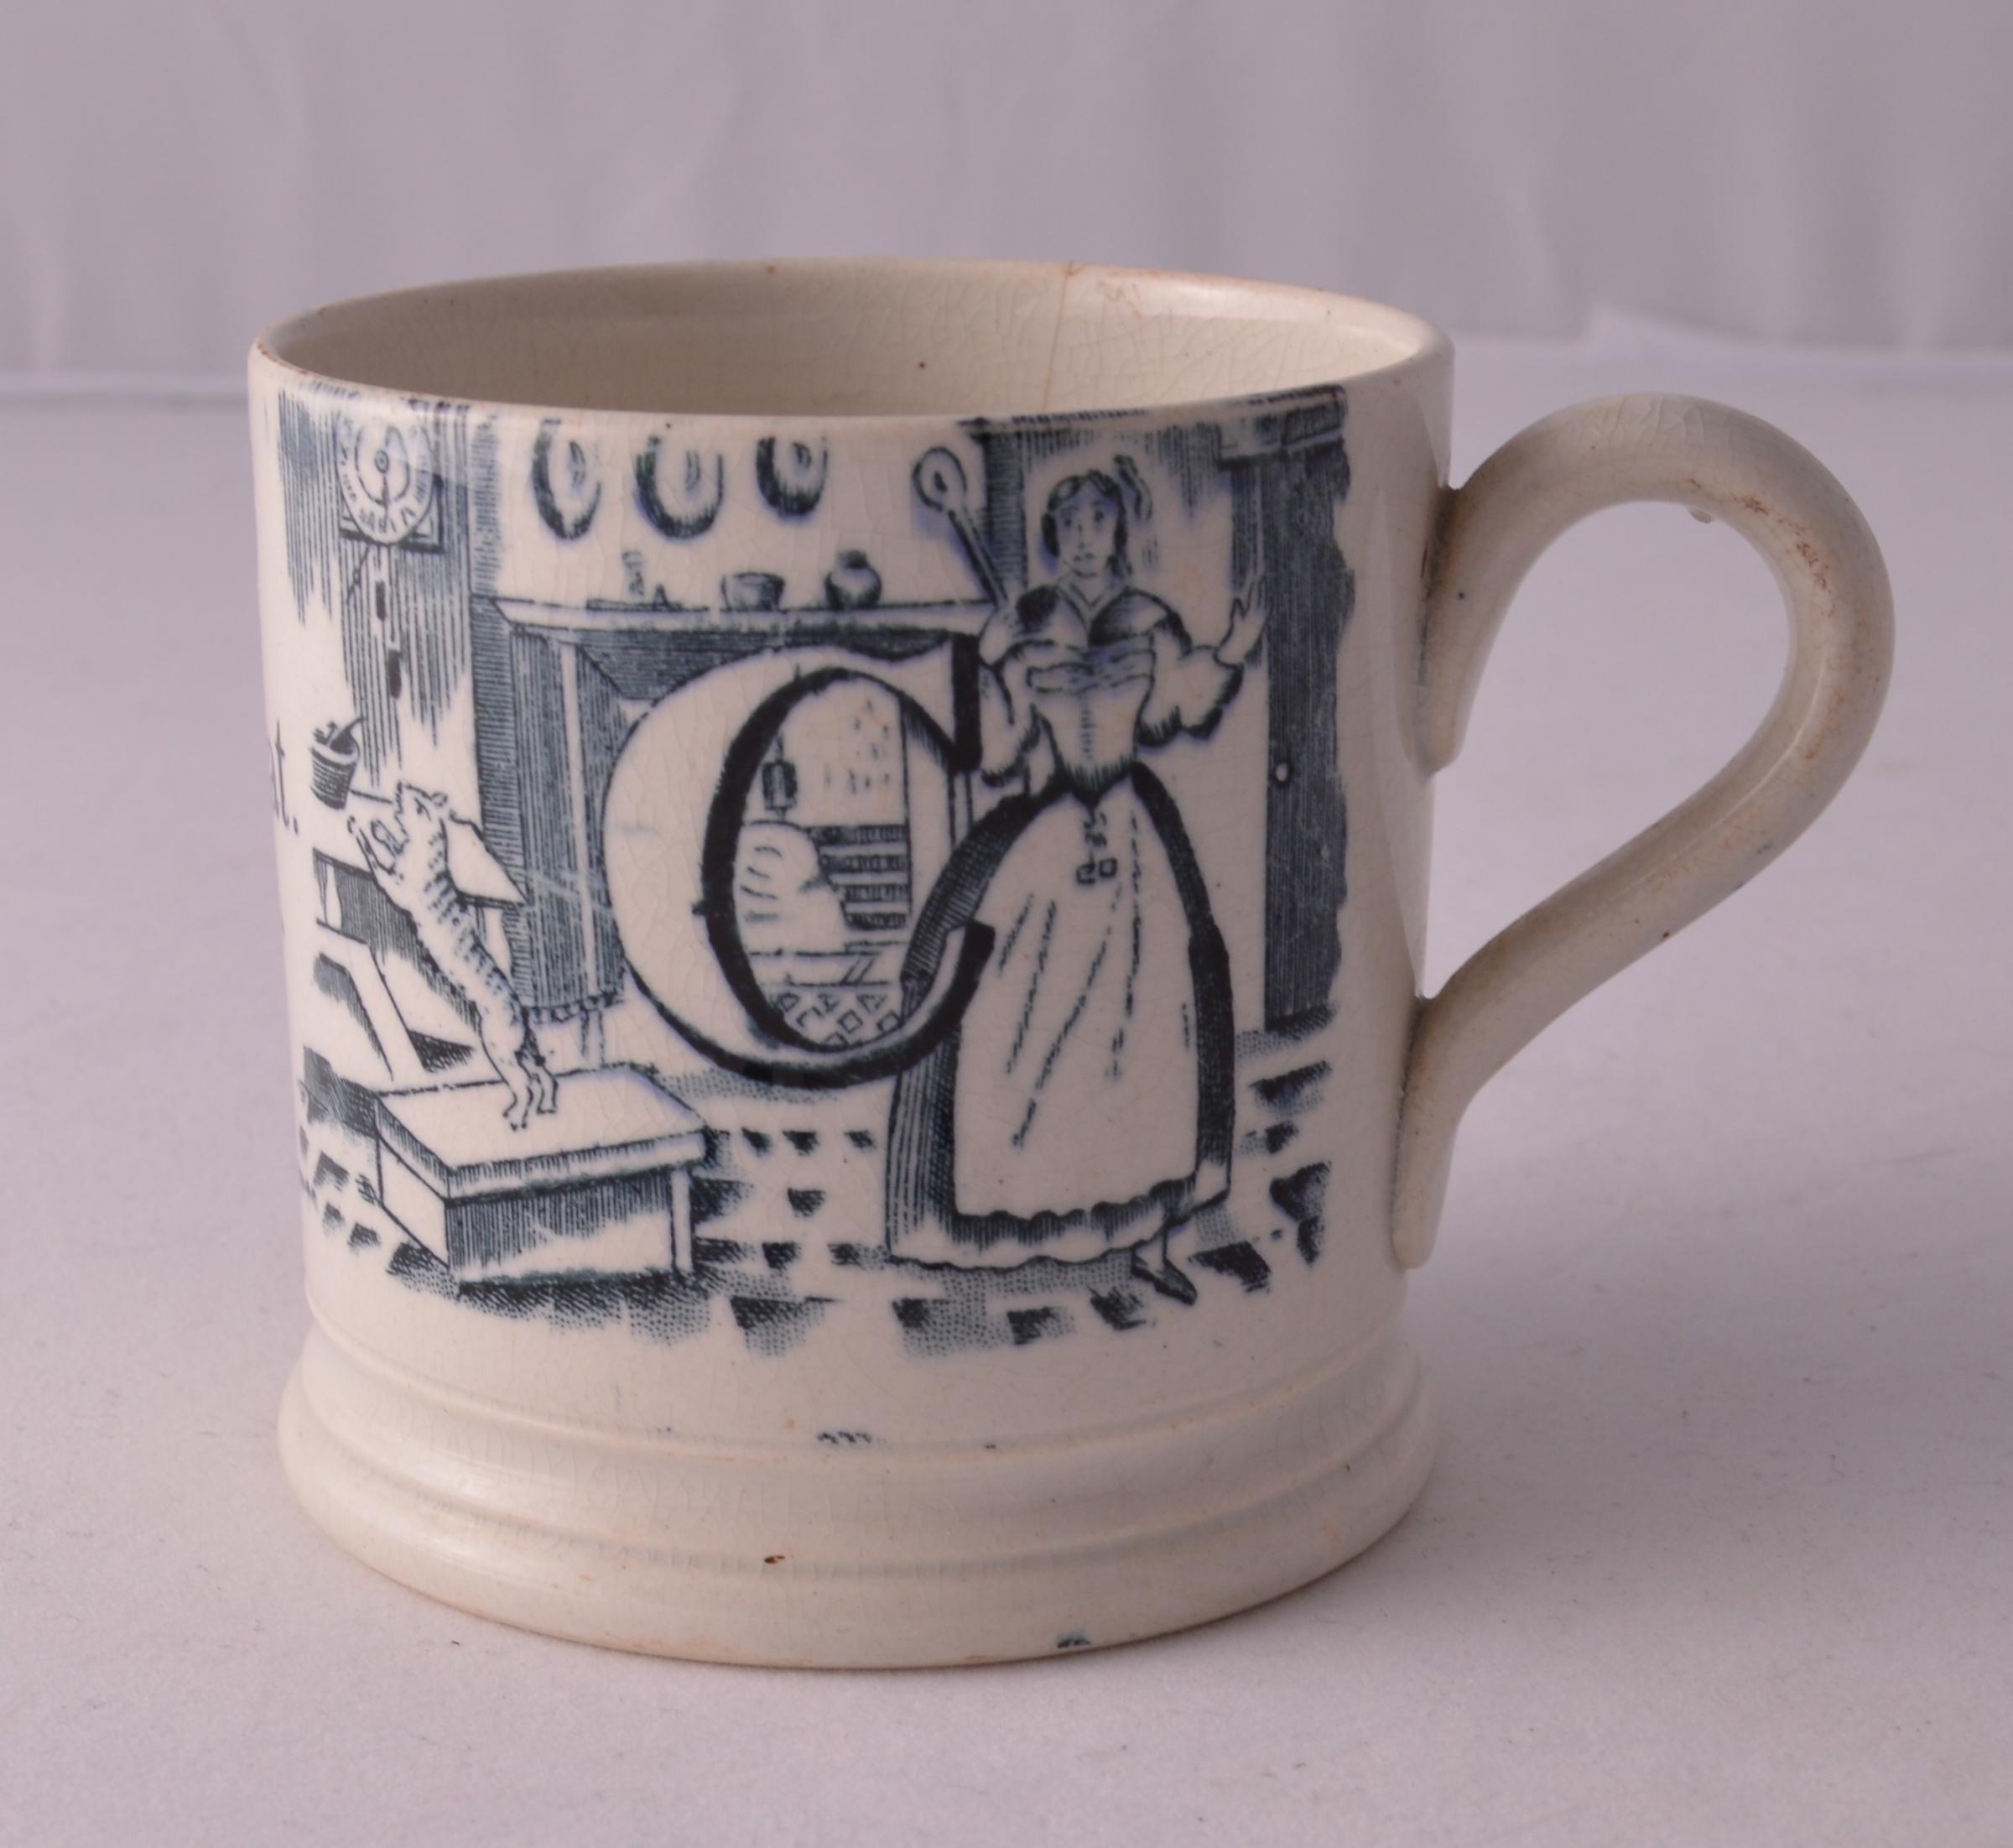 This quaint mug features in the new exhibition